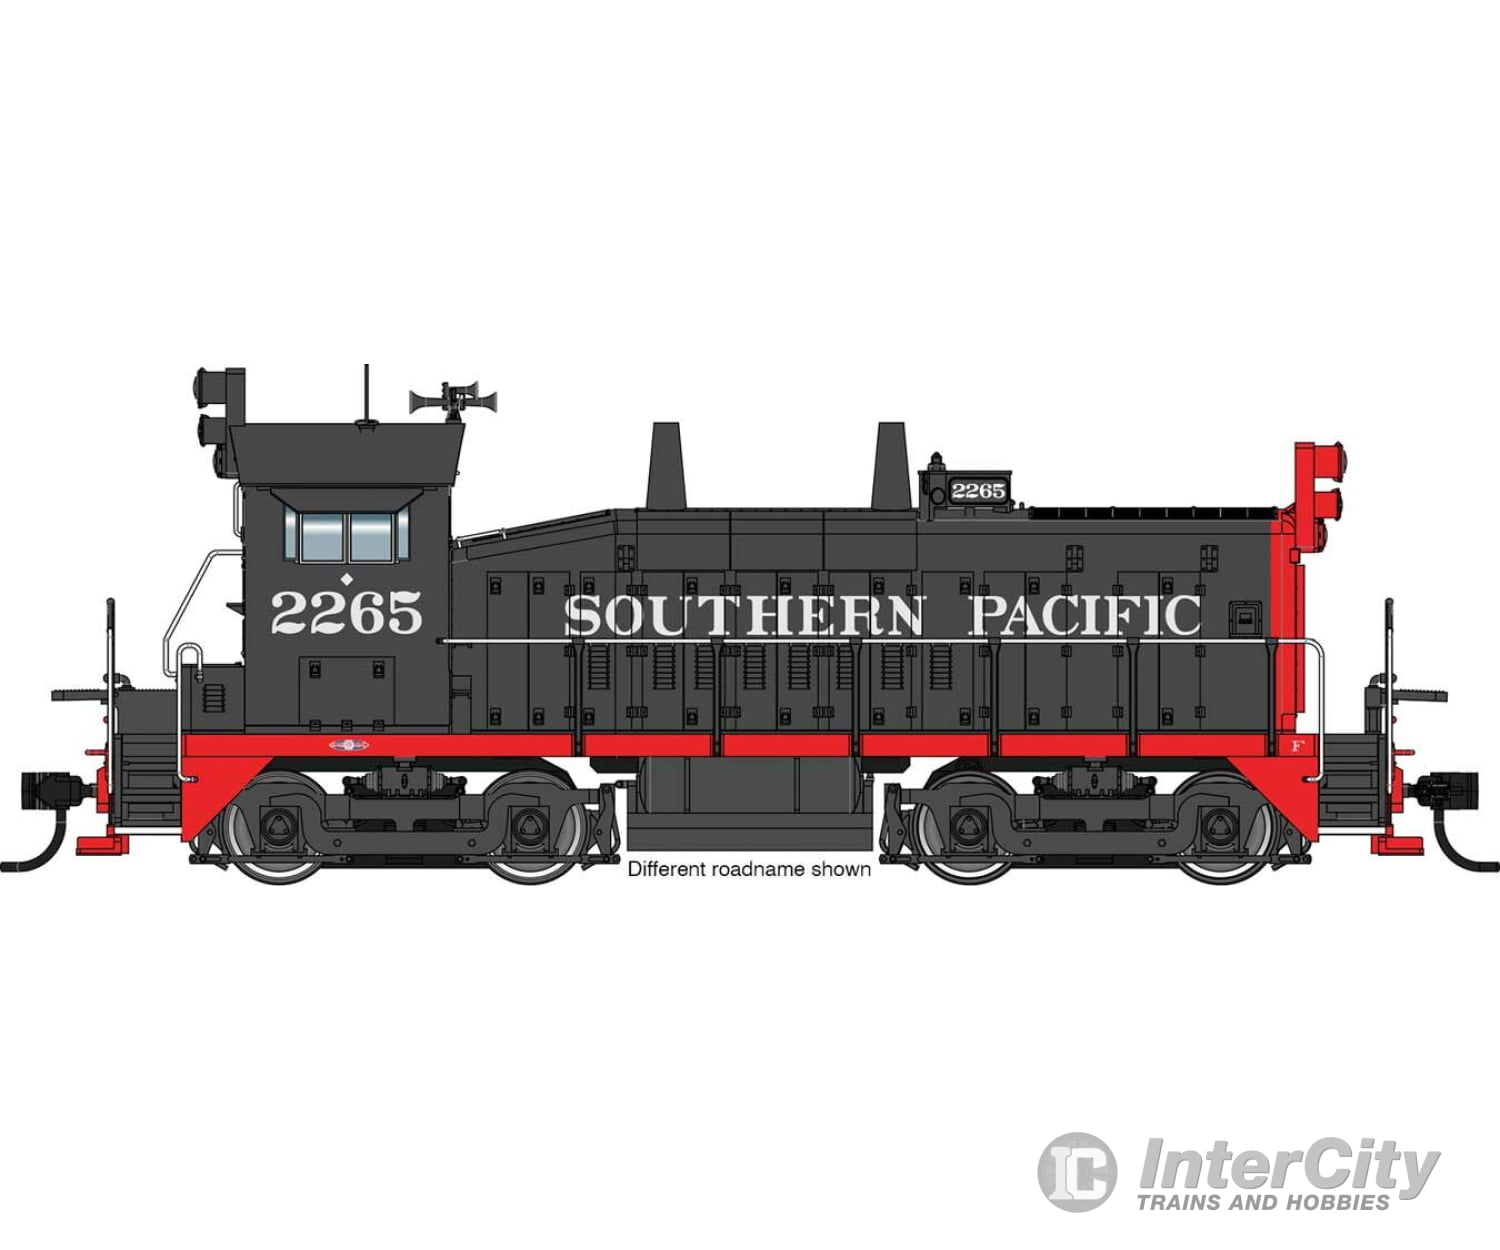 Walthers Proto 48514 Emd Sw1200 - Standard Dc -- Southern Pacific(Tm) #2282 Locomotives